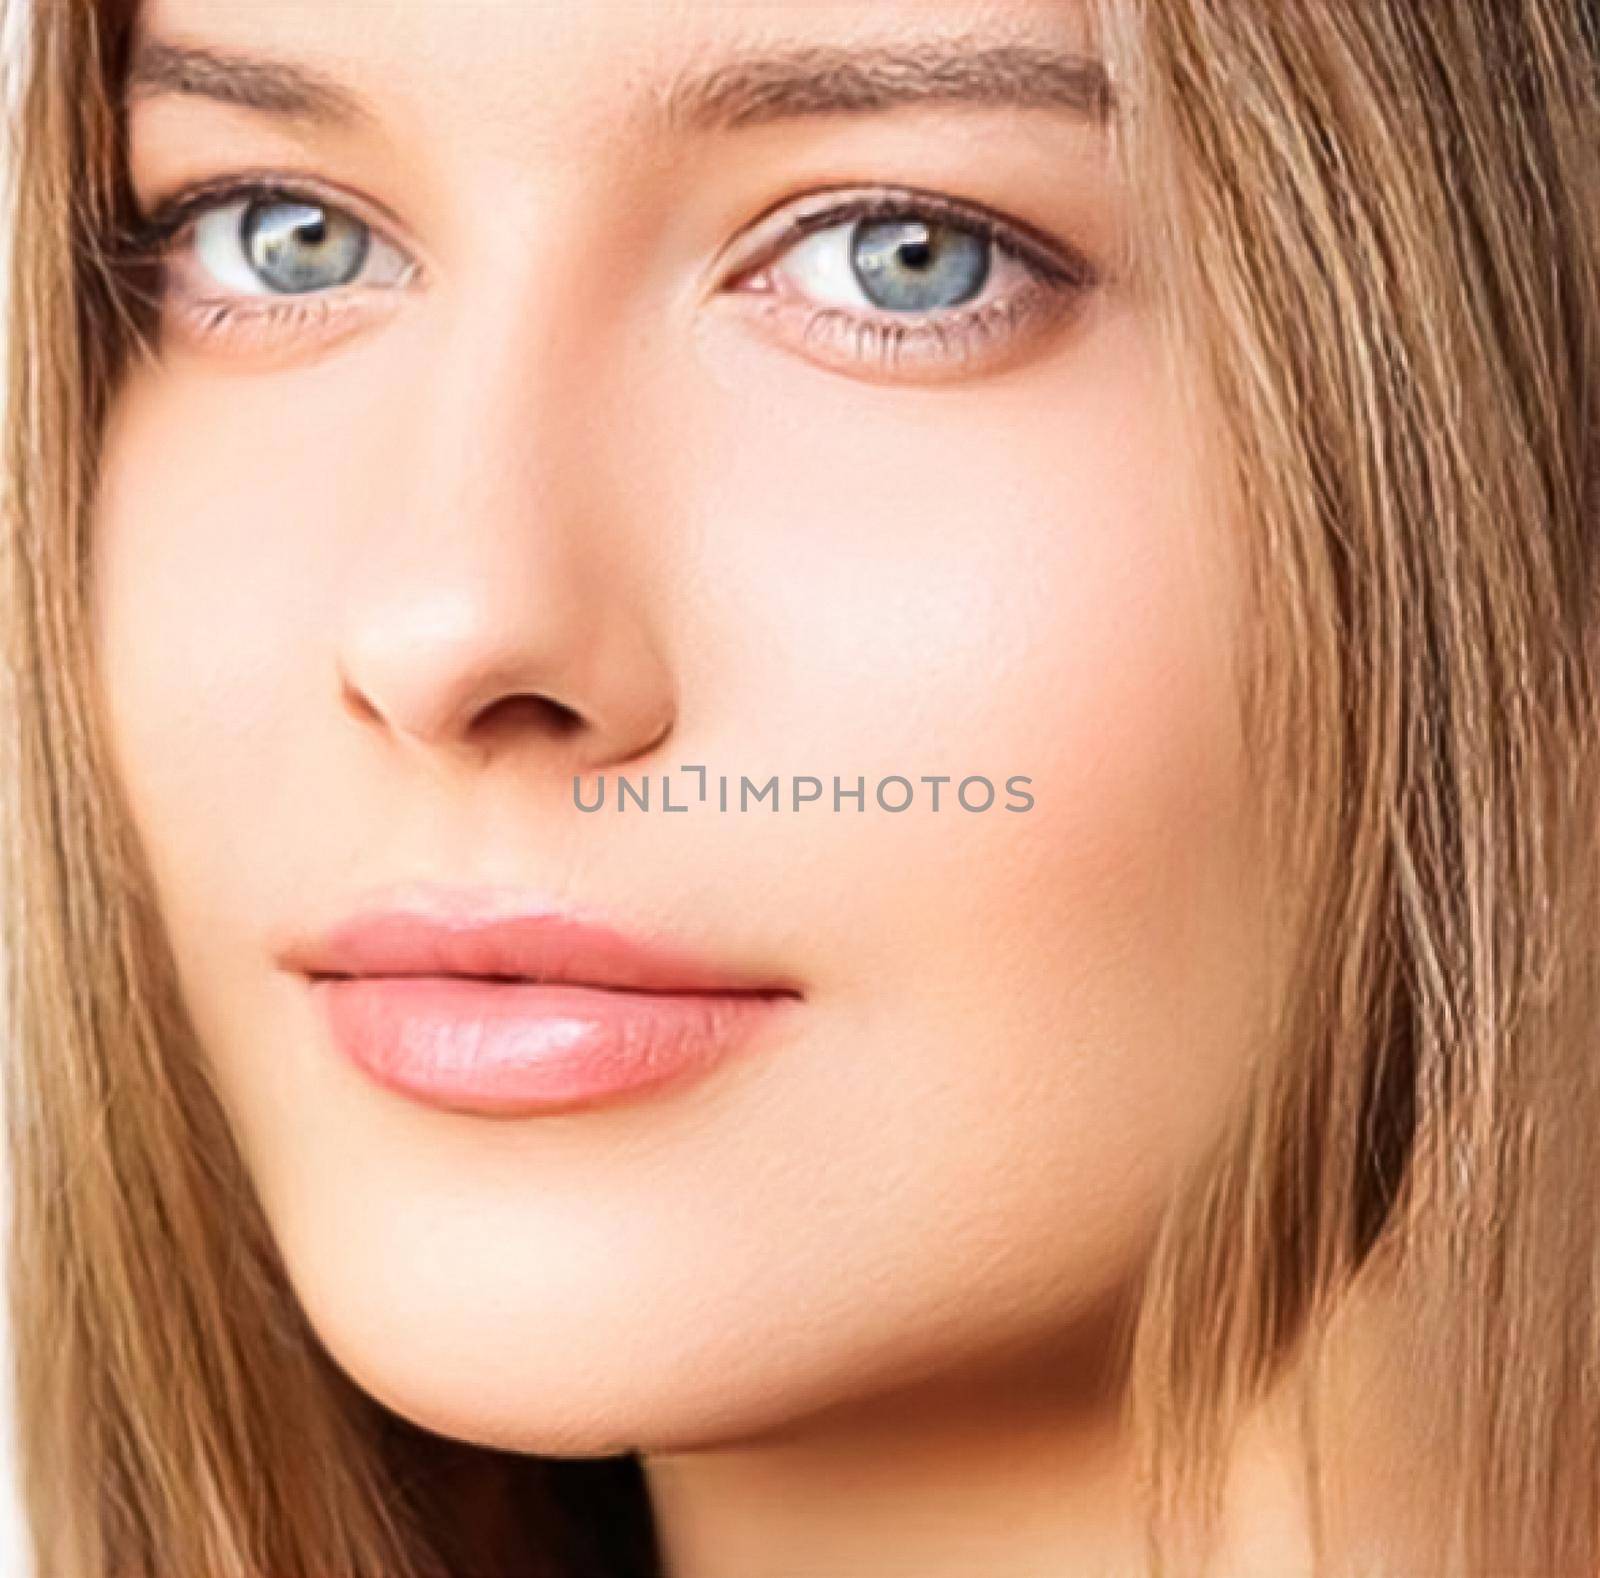 Beauty, skincare and make-up, portrait of beautiful woman, female model face close-up for skin care and makeup by Anneleven